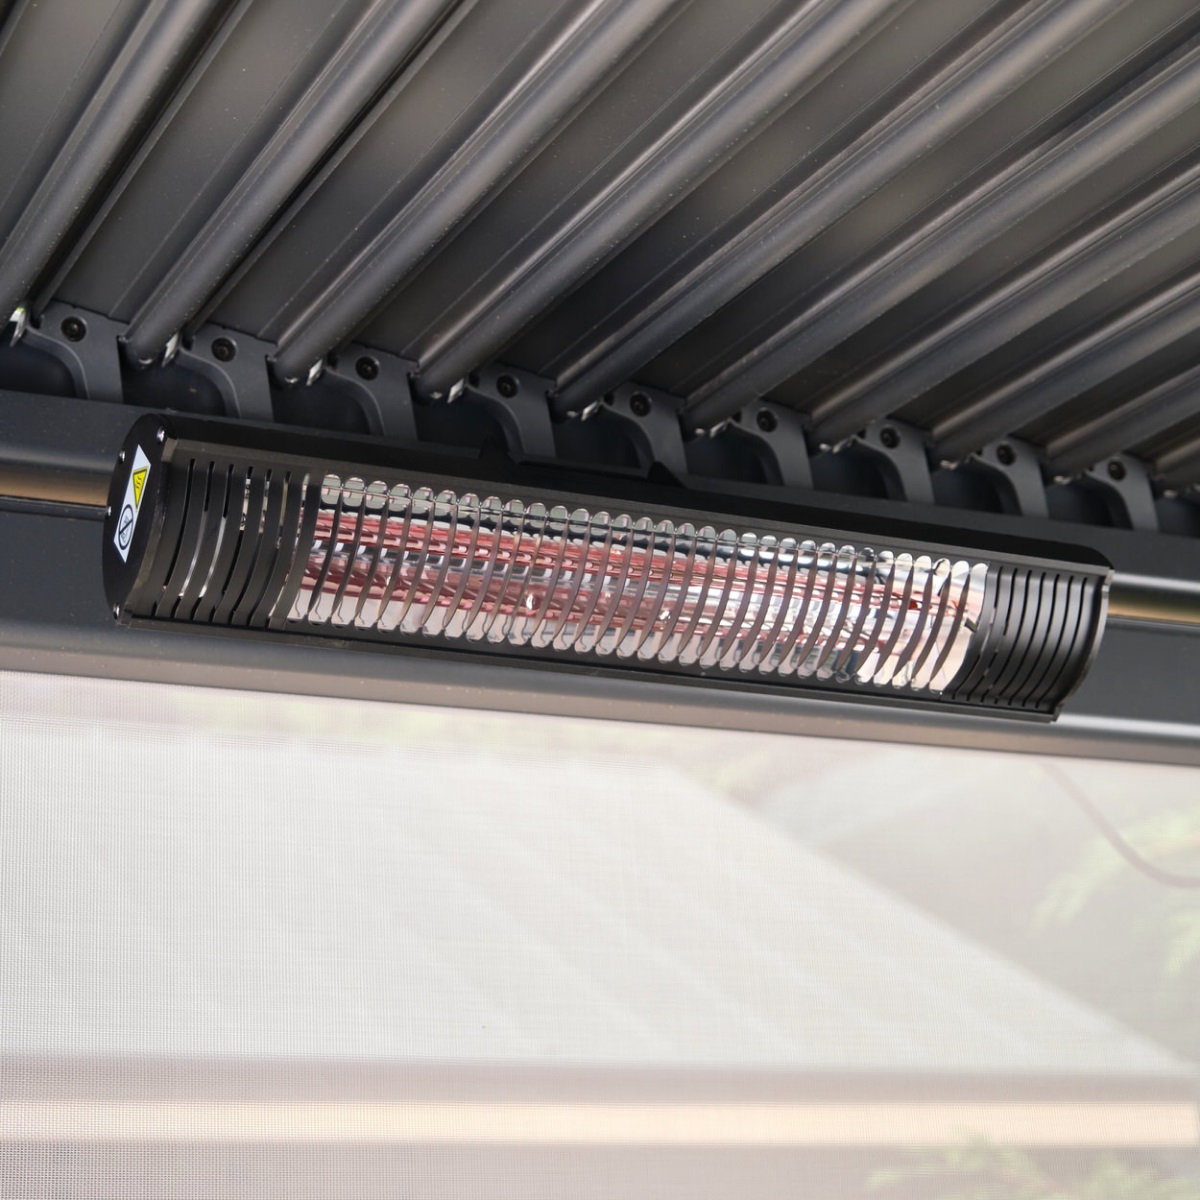 Electric wall mounted patio heater